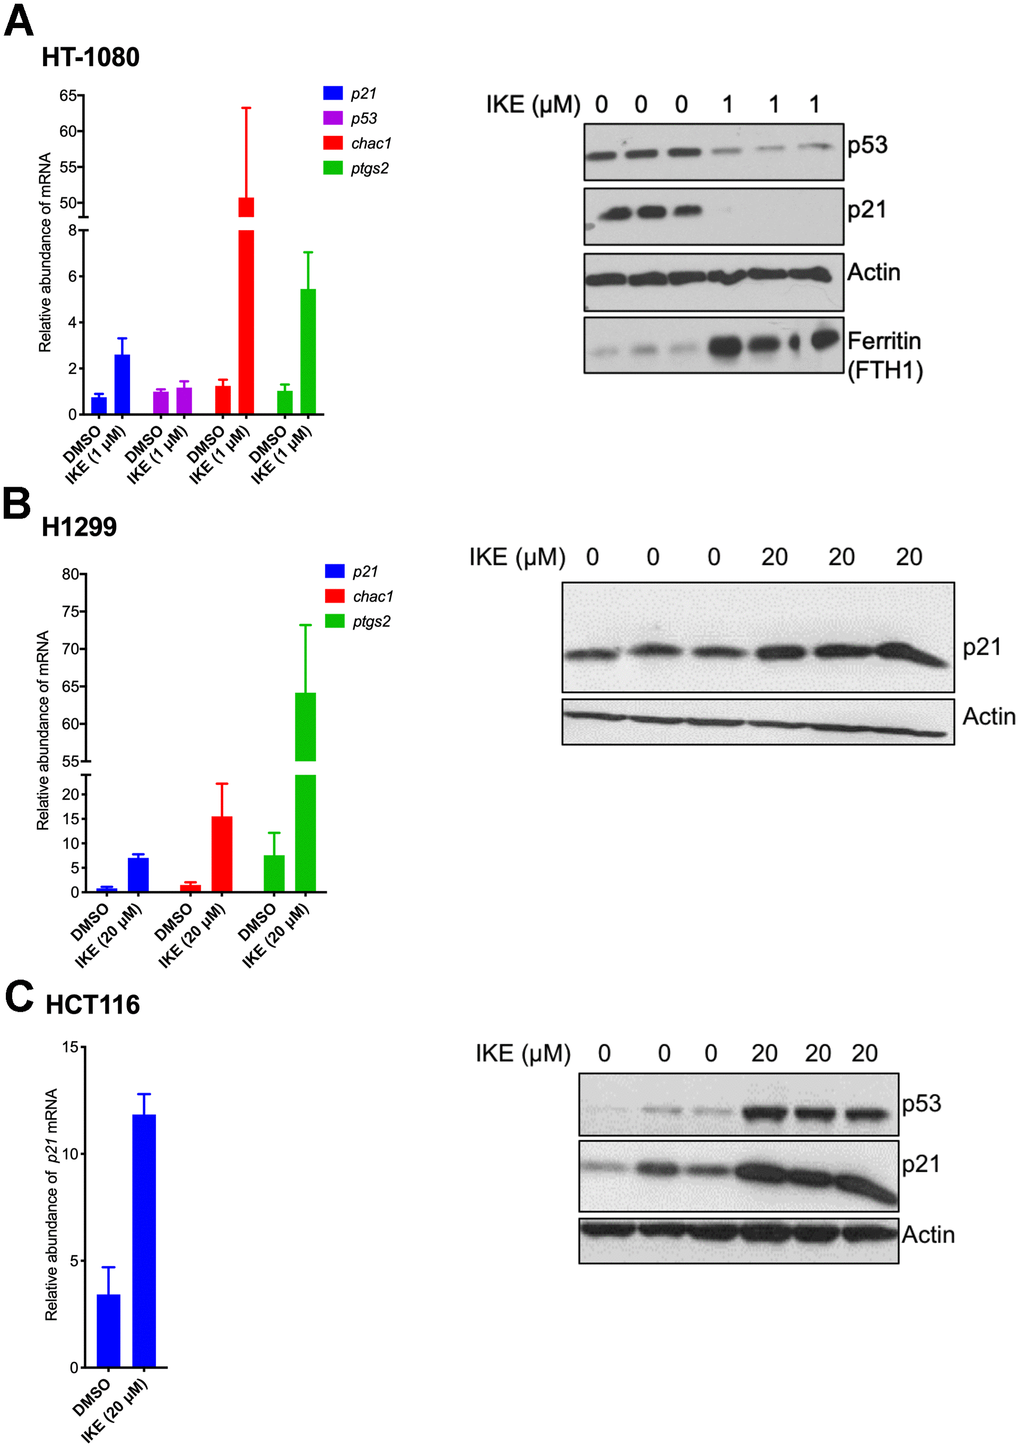 p21 mRNA is upregulated in both ferroptosis-sensitive and ferroptosis-resistant cells after treatment with IKE. (A–C) Left panels: Impact of IKE treatment on the mRNA levels of p21. (A) HT-1080 cells were treated for 16 hours while (B, C) H1299 and HCT-116 cells were treated for 48 hours. mRNA levels of ptgs2 and chac1 were measured in (A, B) as markers of ferroptosis. Right panels: the corresponding protein levels in the cells used in the left panels are shown. The data in left panels of (A–C) represent the mean ± SE for three biological replicates with two technical replicates each.